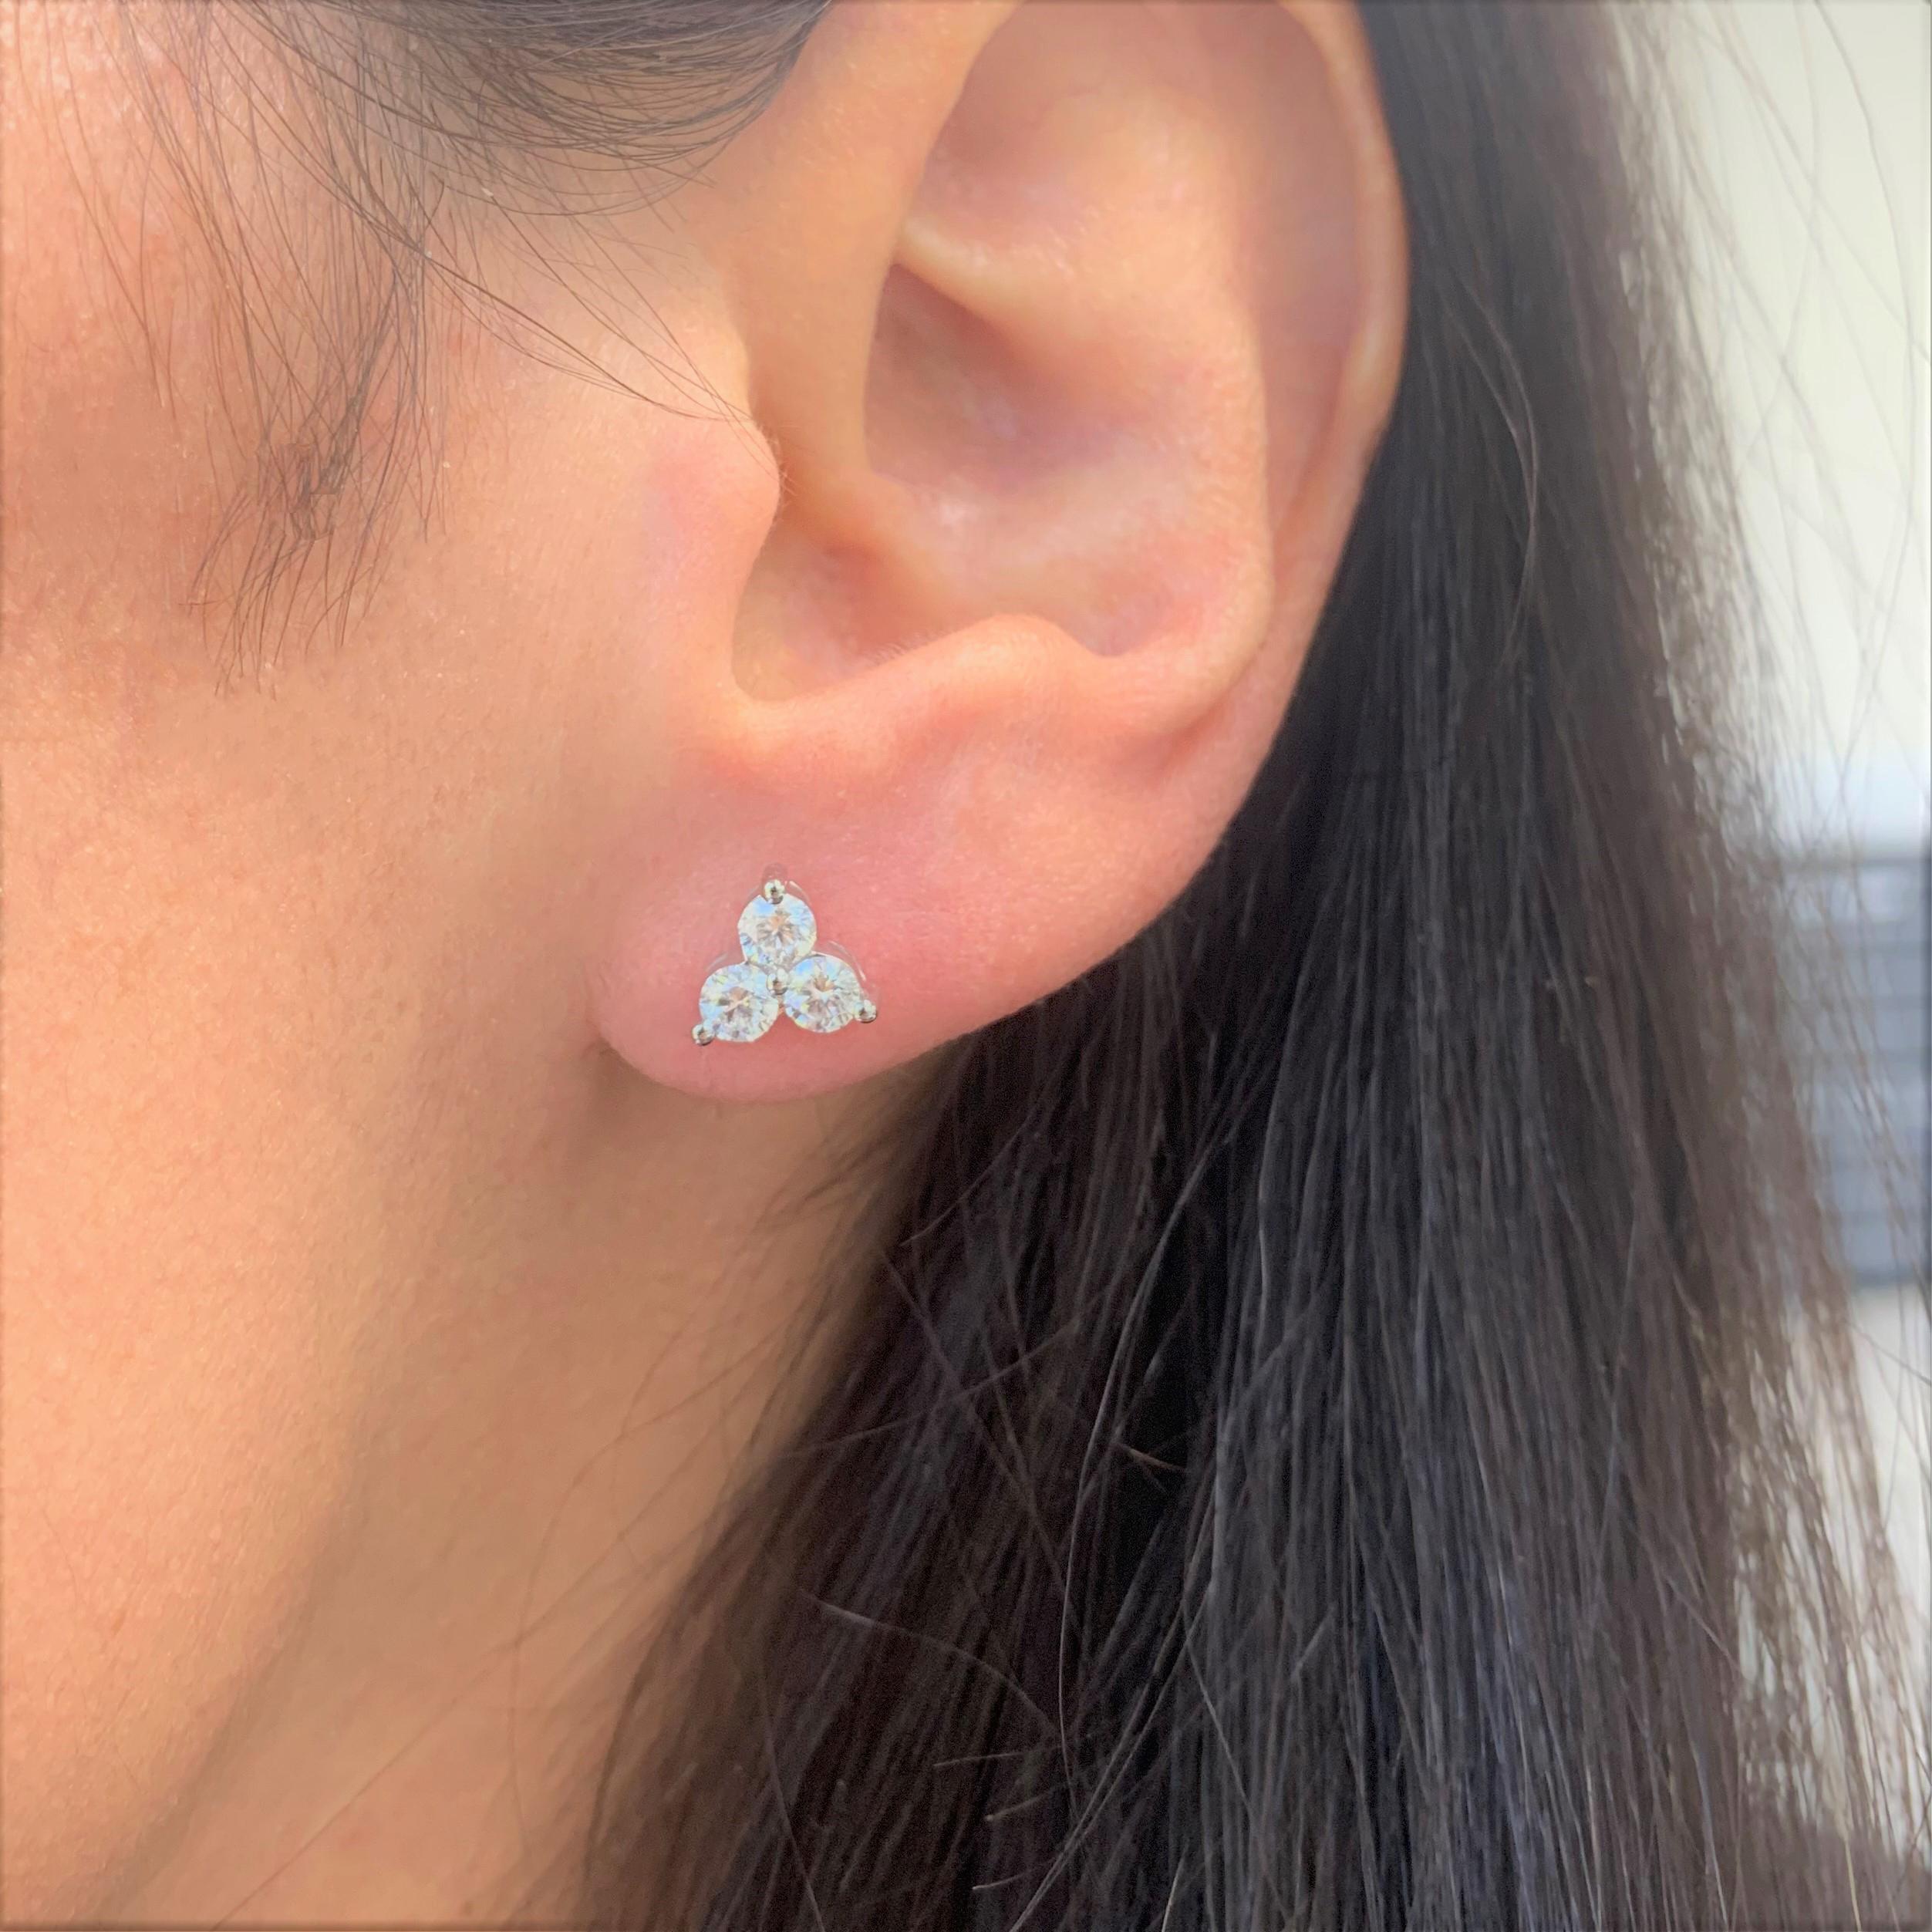 These Beautiful and Classic 3-Stone Diamond Cluster Stud Earrings are crafted of 14K White Gold and feature 6 white round Diamonds weighing 0.97cts, has butterfly push-backs for closure. Diamond Color & Clarity is GH-SI1
 
 14K White Gold
 0.97cts